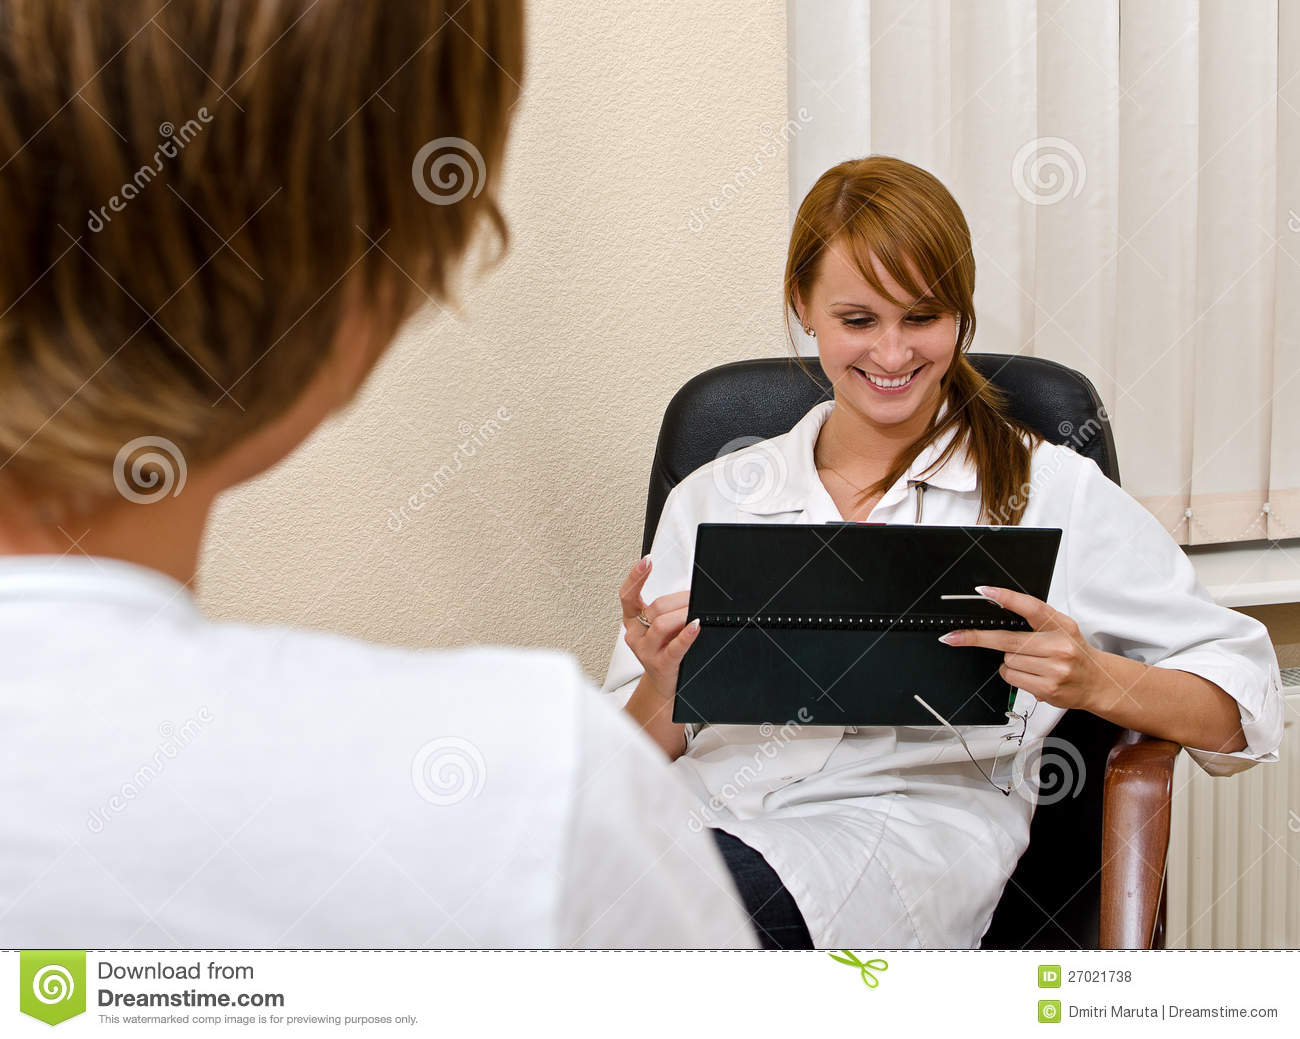 Visit To A Psychologist Royalty Free Stock Photos   Image  27021738